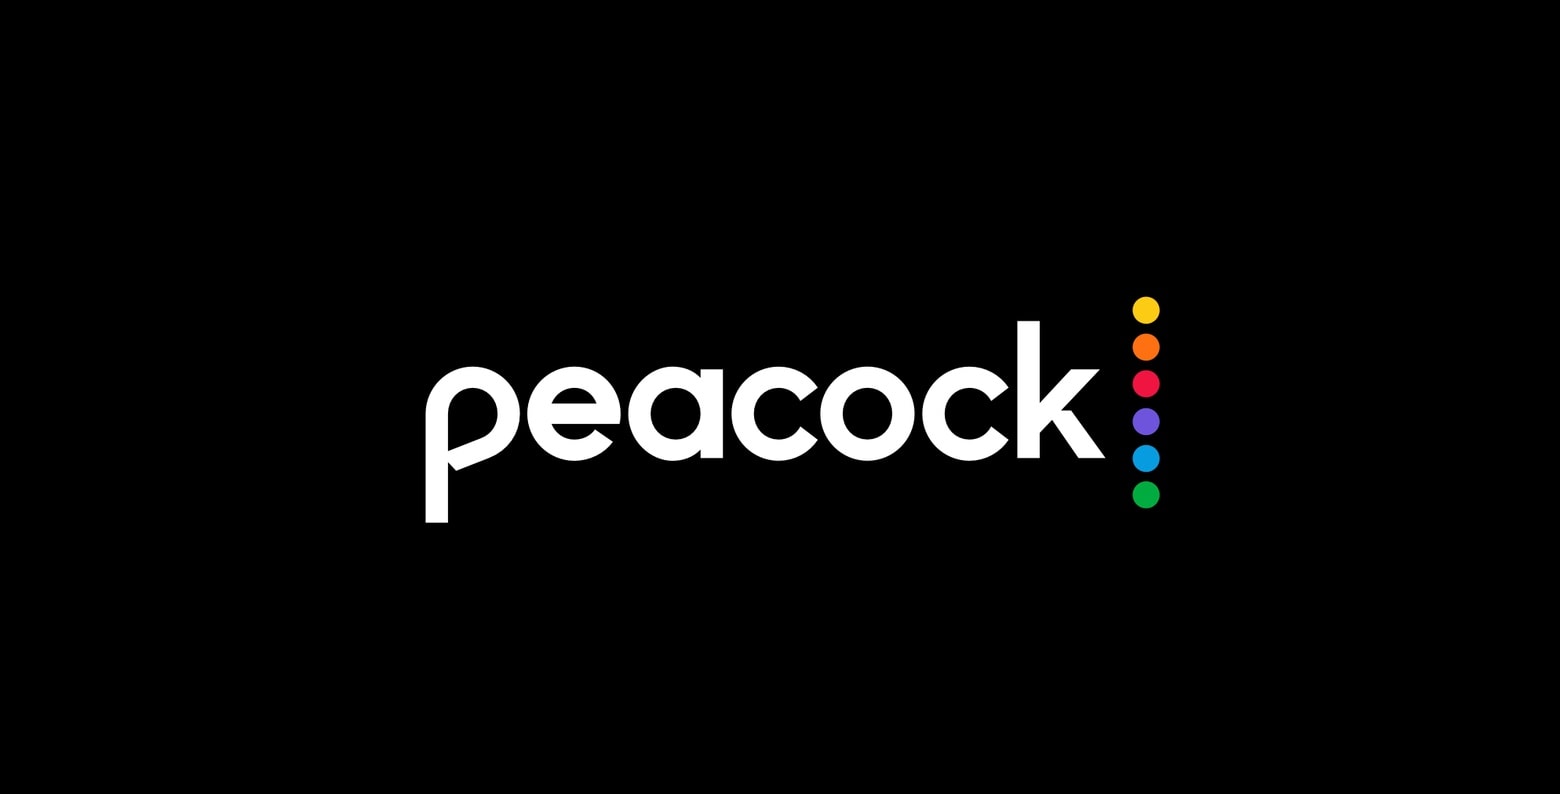 Peacock from NBCUniversal